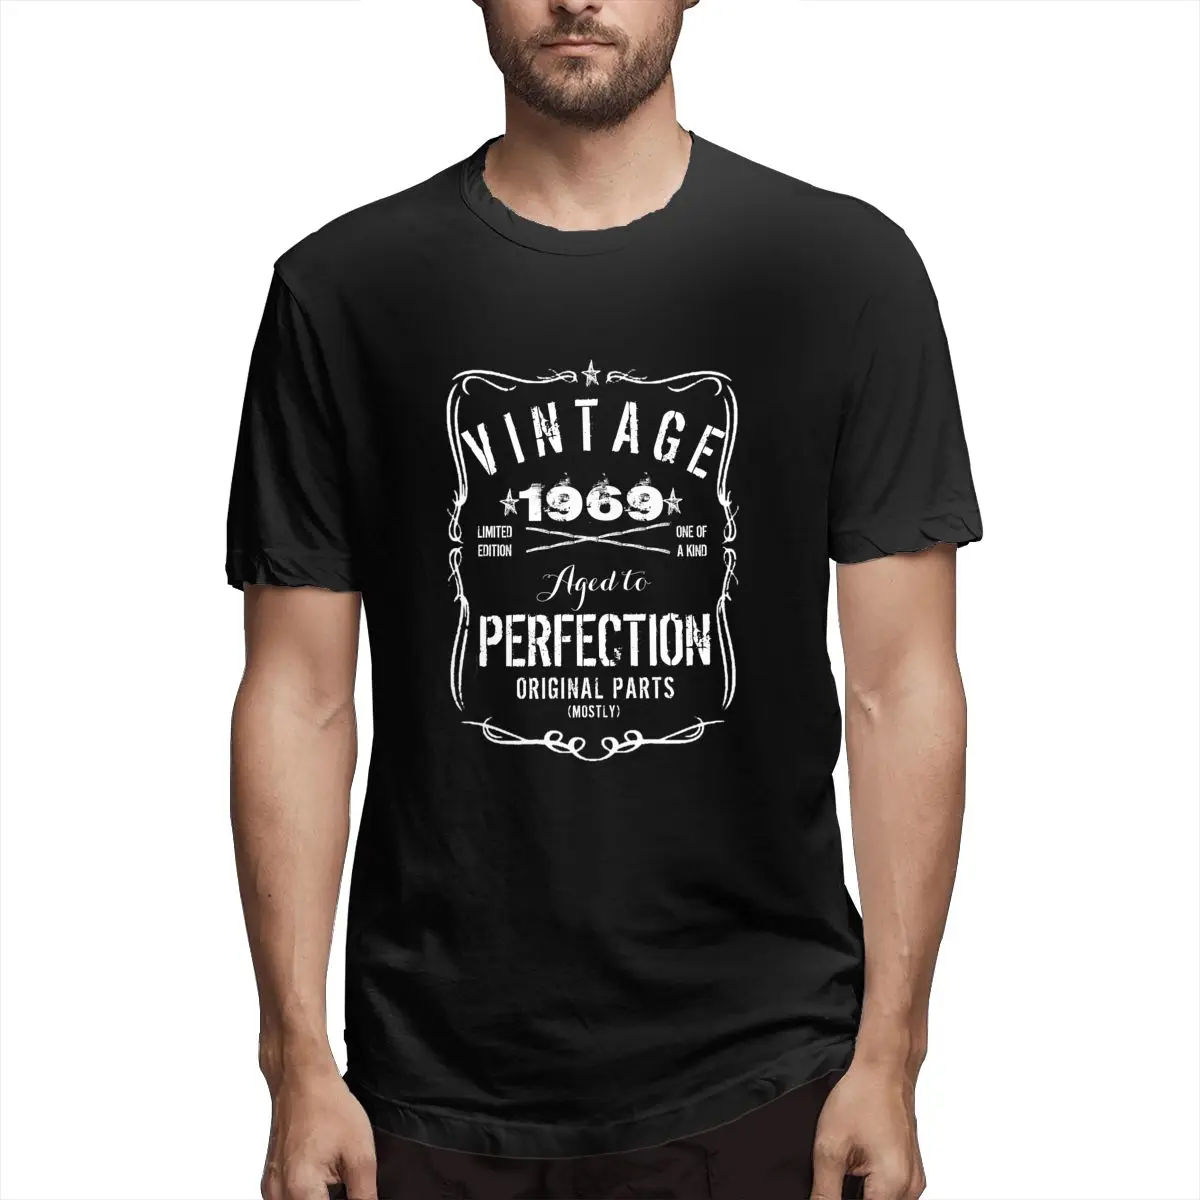 

VINTAGE SINCE 1969 AGED TO PERFECTION Graphic Tee Men's Short Sleeve T-shirt Aesthetic Tops